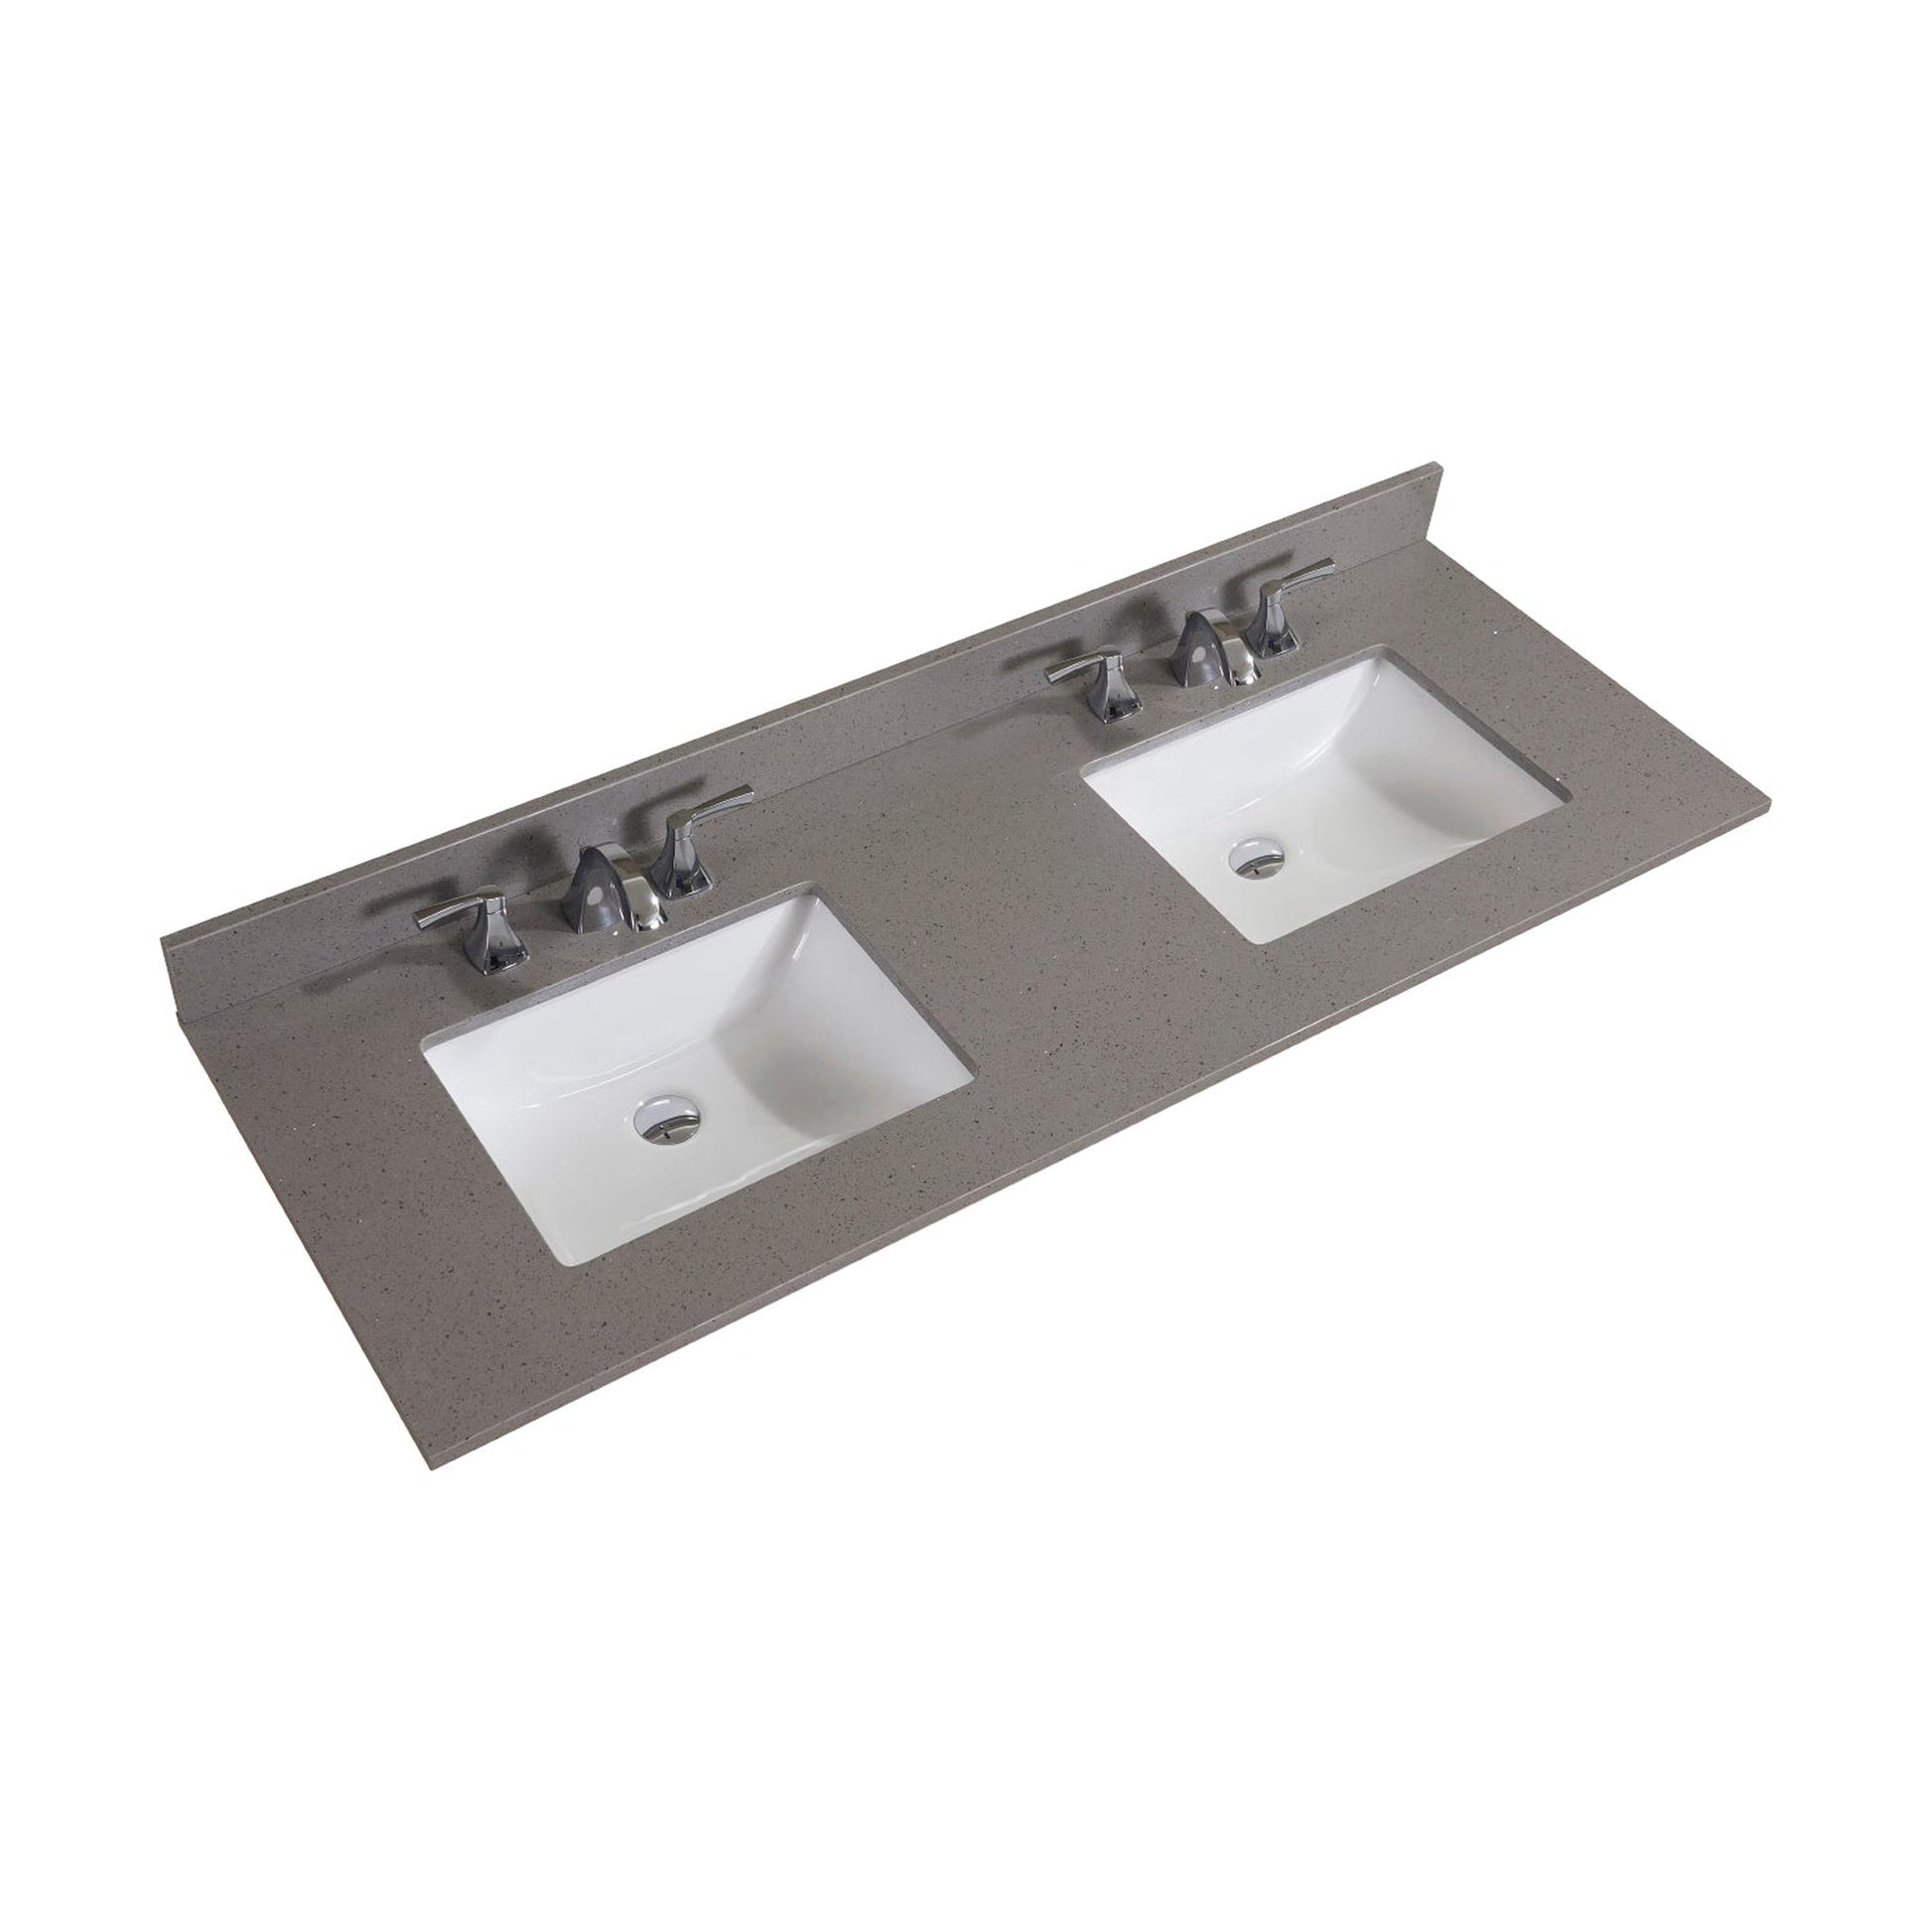 Altair Imperia 61" x 22" Mountain Gray Composite Stone Bathroom Vanity Top With White SInk